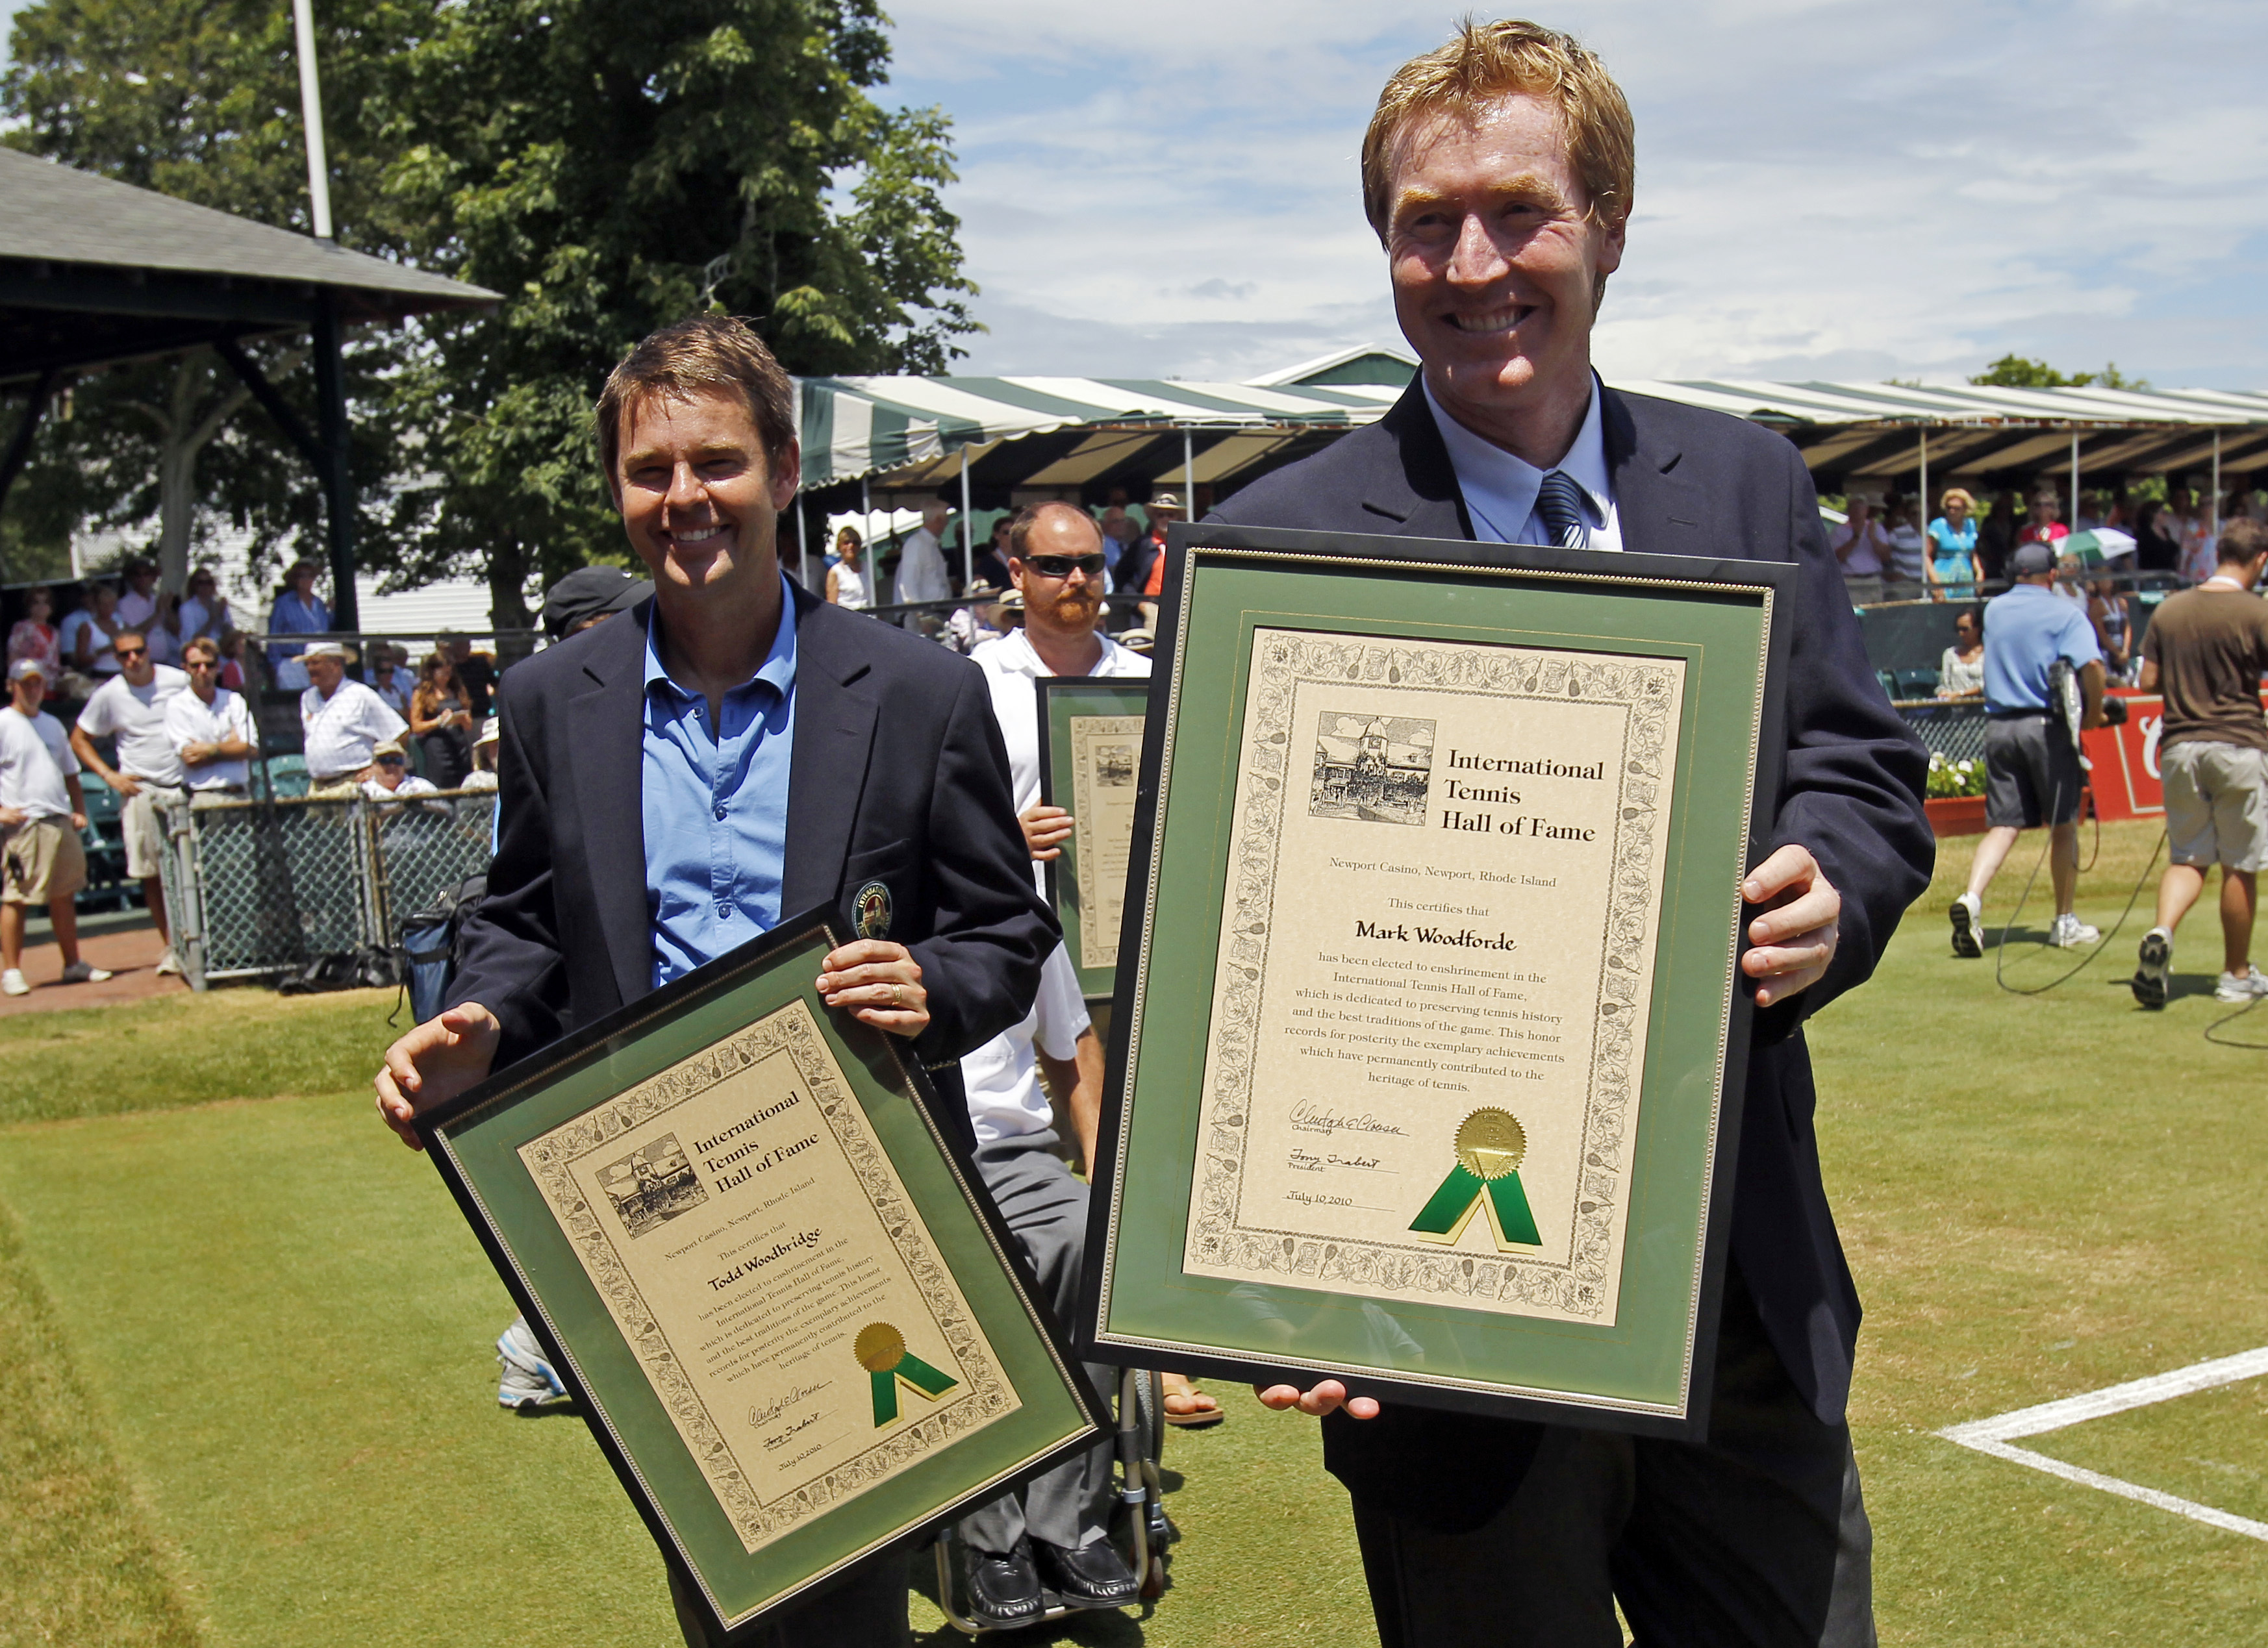 Doubles partners Mark Woodforde and Todd Woodbridge of Australia carry their plaques around center court after being inducted into the International Tennis Hall of Fame in Newport